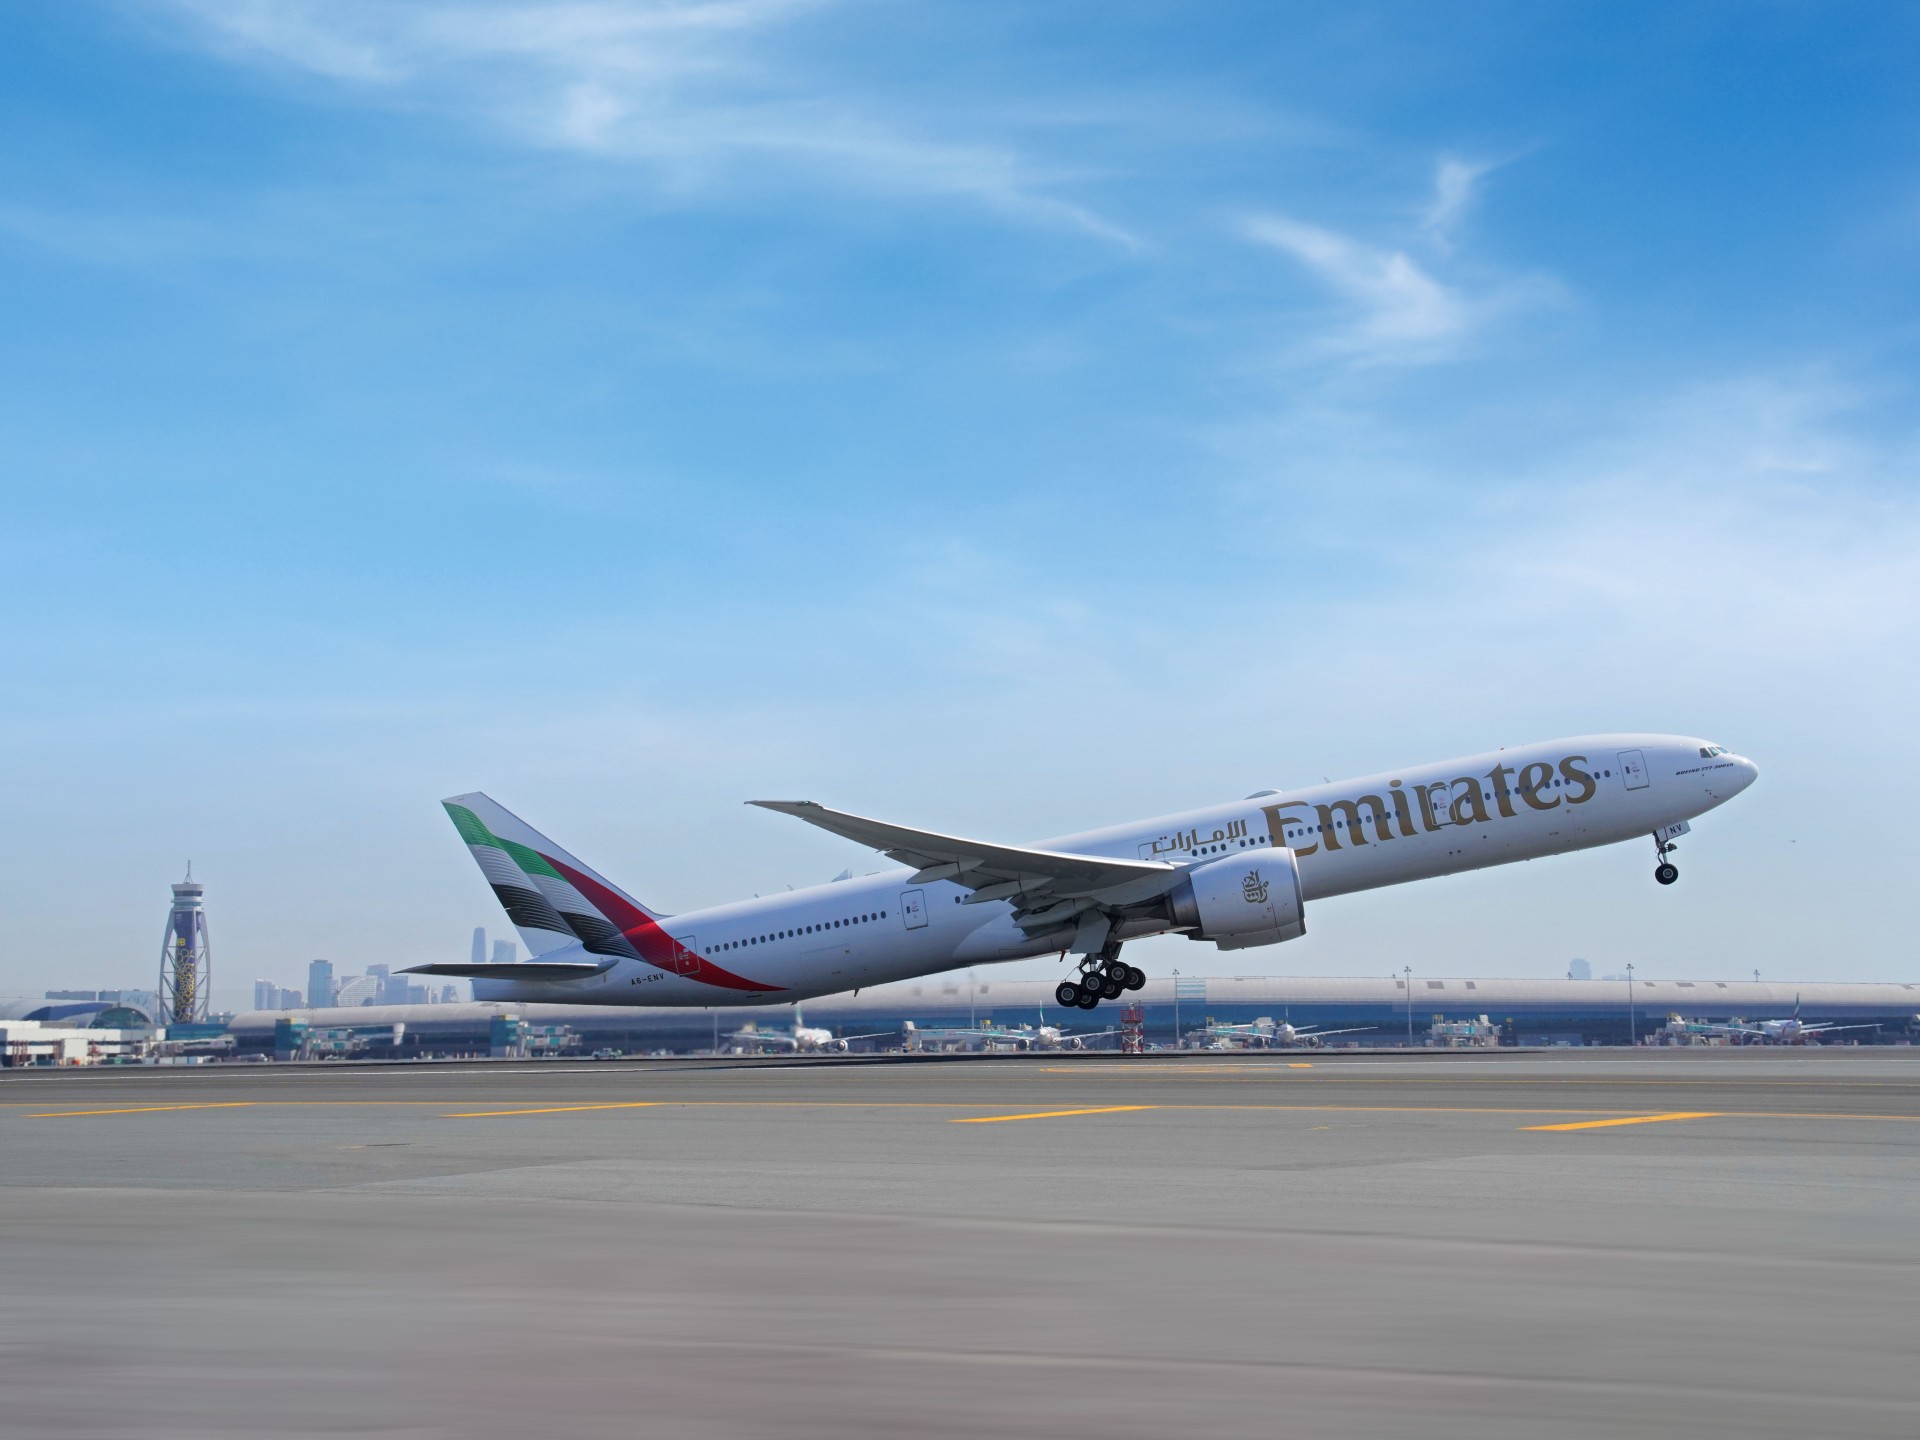 Emirates 777 taking off from Dubai airport